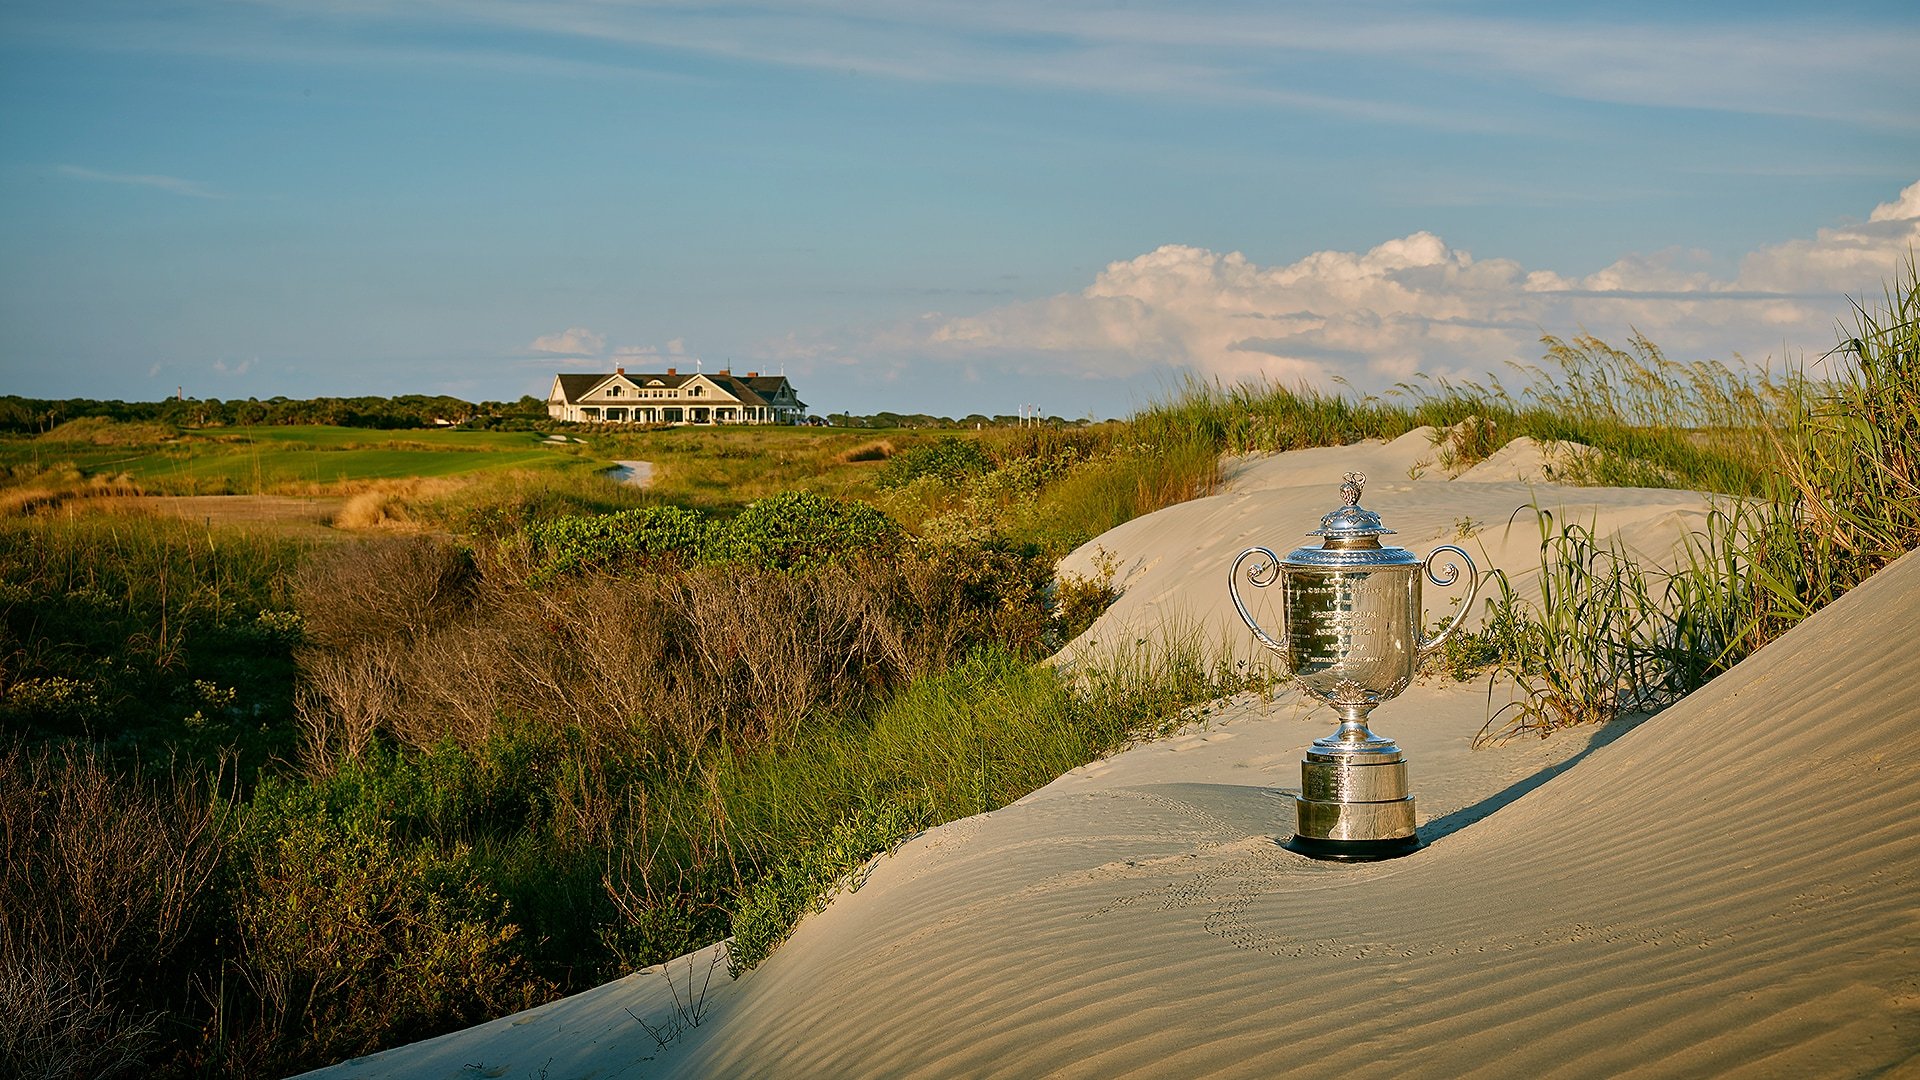 Tee times for Round 4 of the 2021 PGA Championship